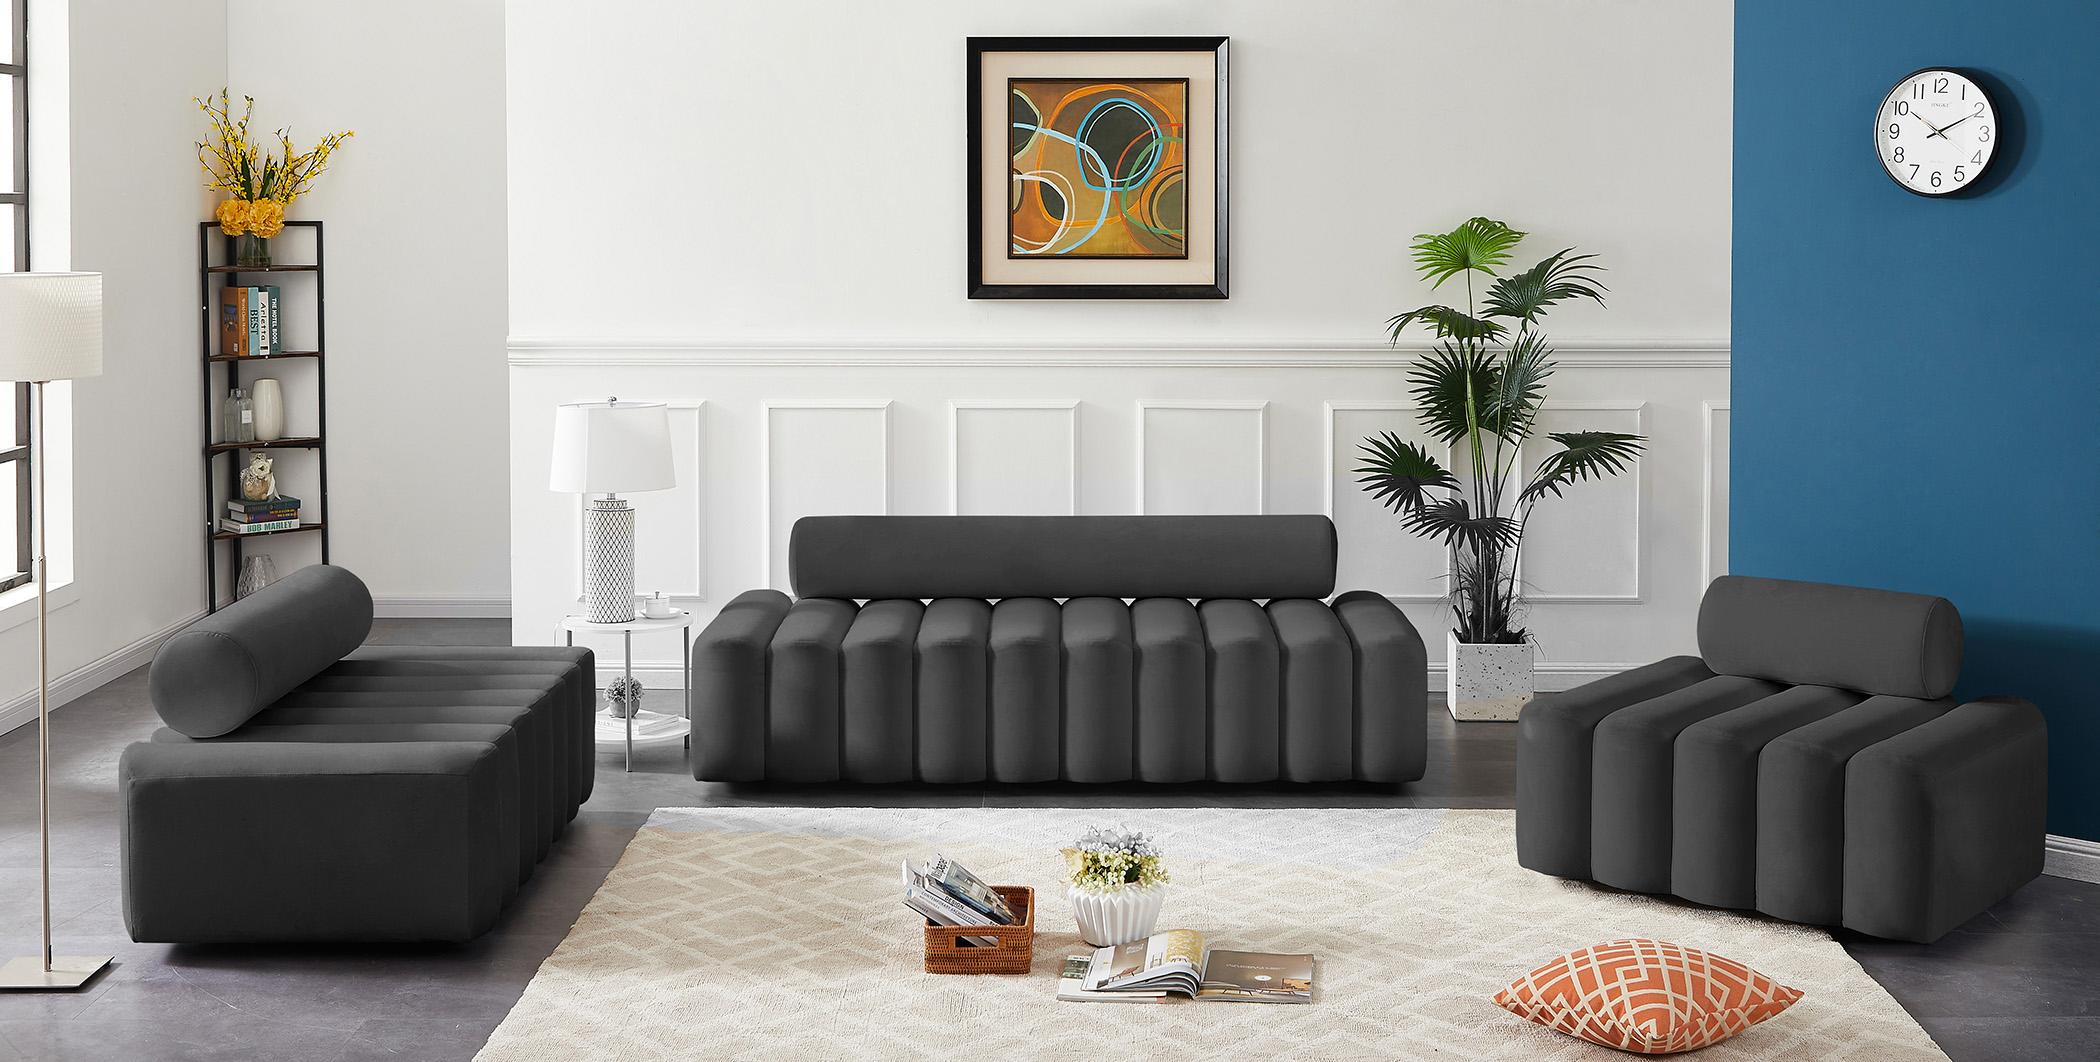 

    
647Grey-S Glam GREY Velvet Channel Tufted Sofa Melody 647Grey-S Meridian Contemporary
